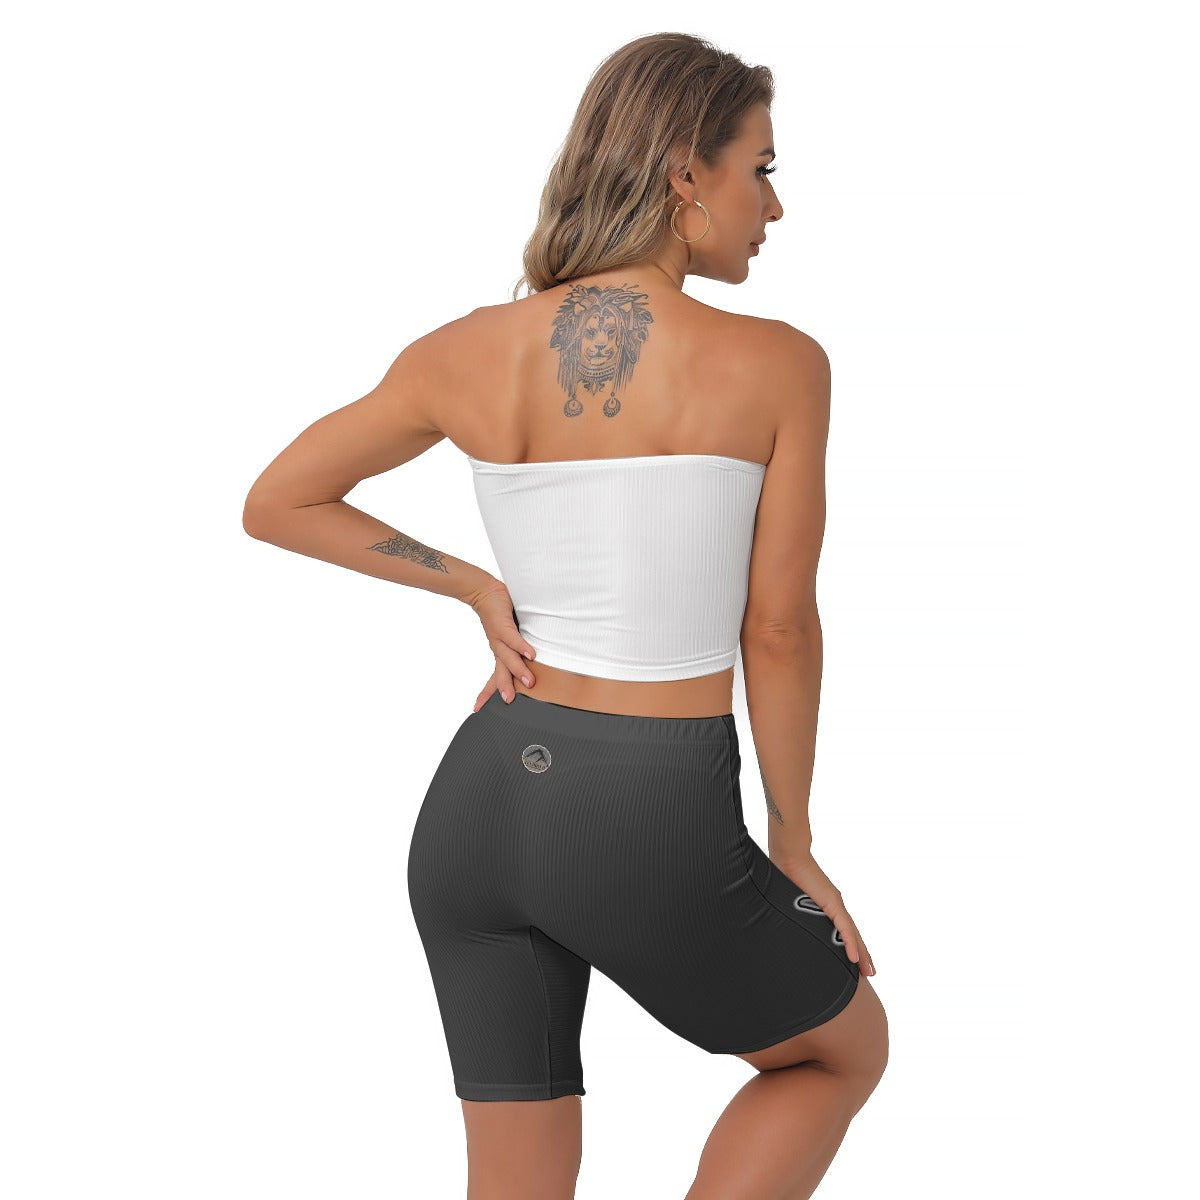 Elevated Whip Womens Gym Spandex